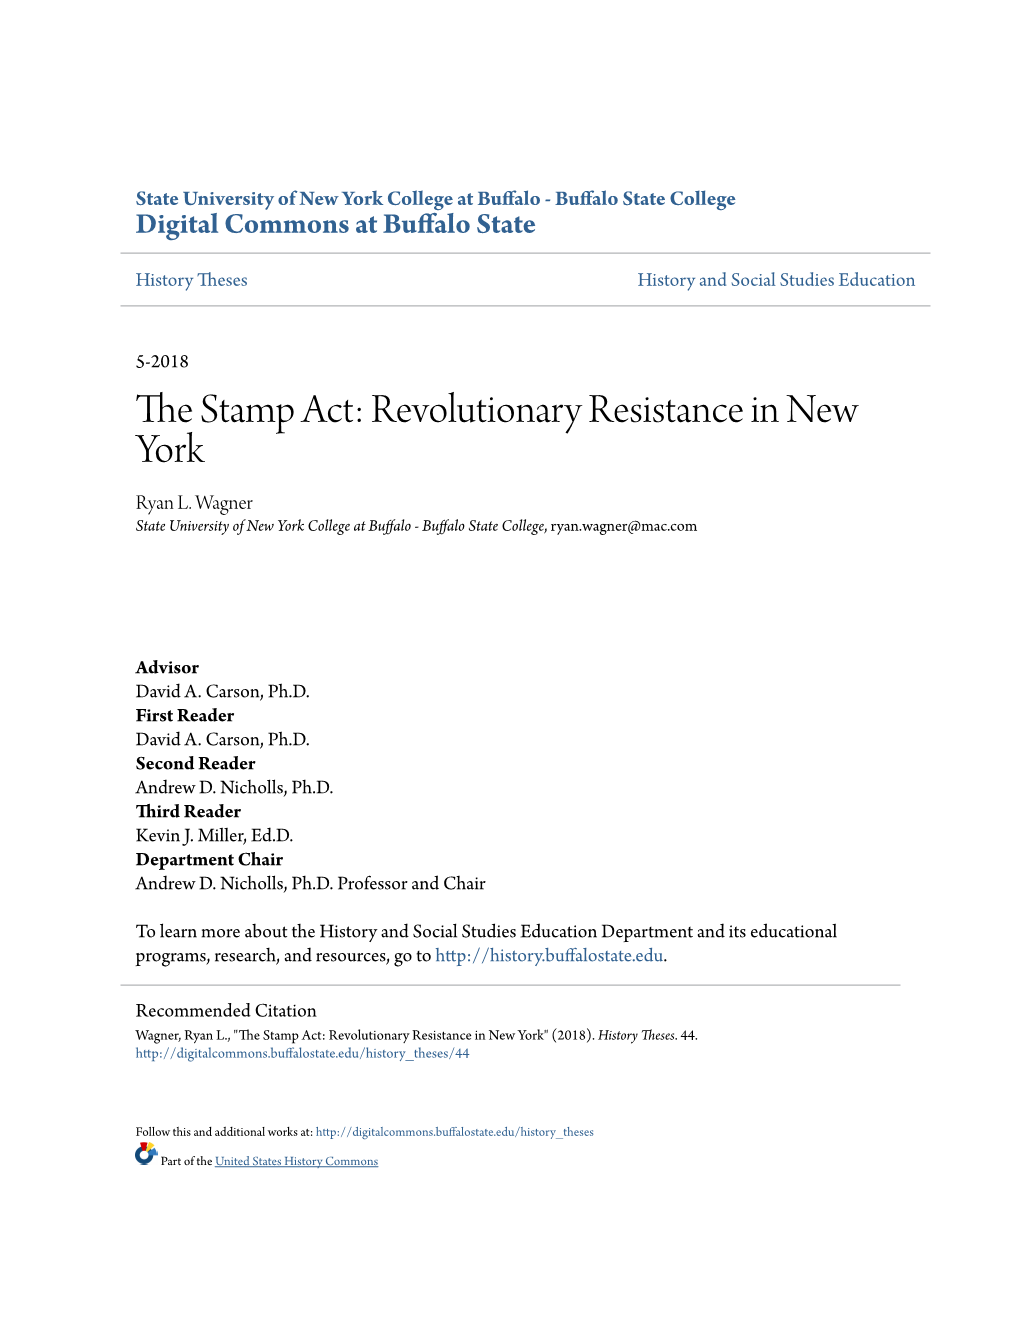 The Stamp Act: Revolutionary Resistance in New York